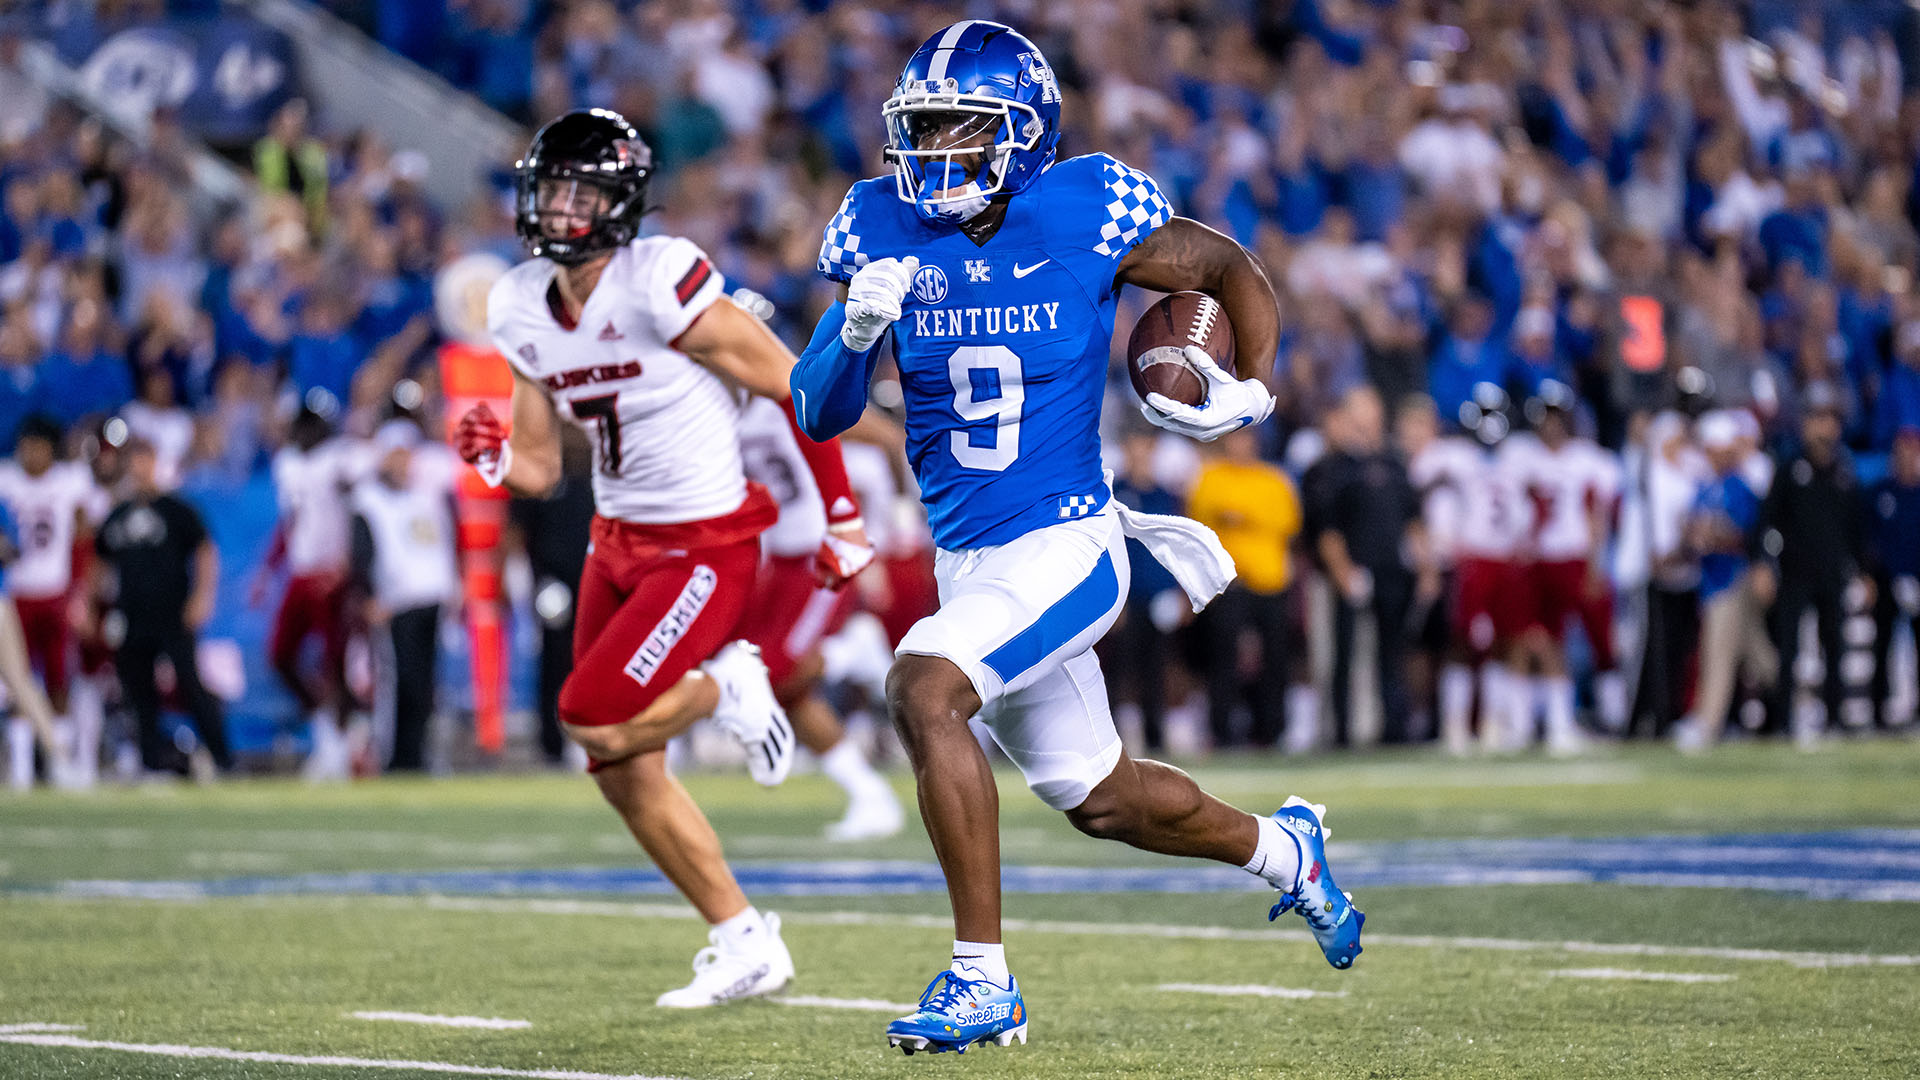 Passing Game Leads No. 8 Kentucky Past Northern Illinois